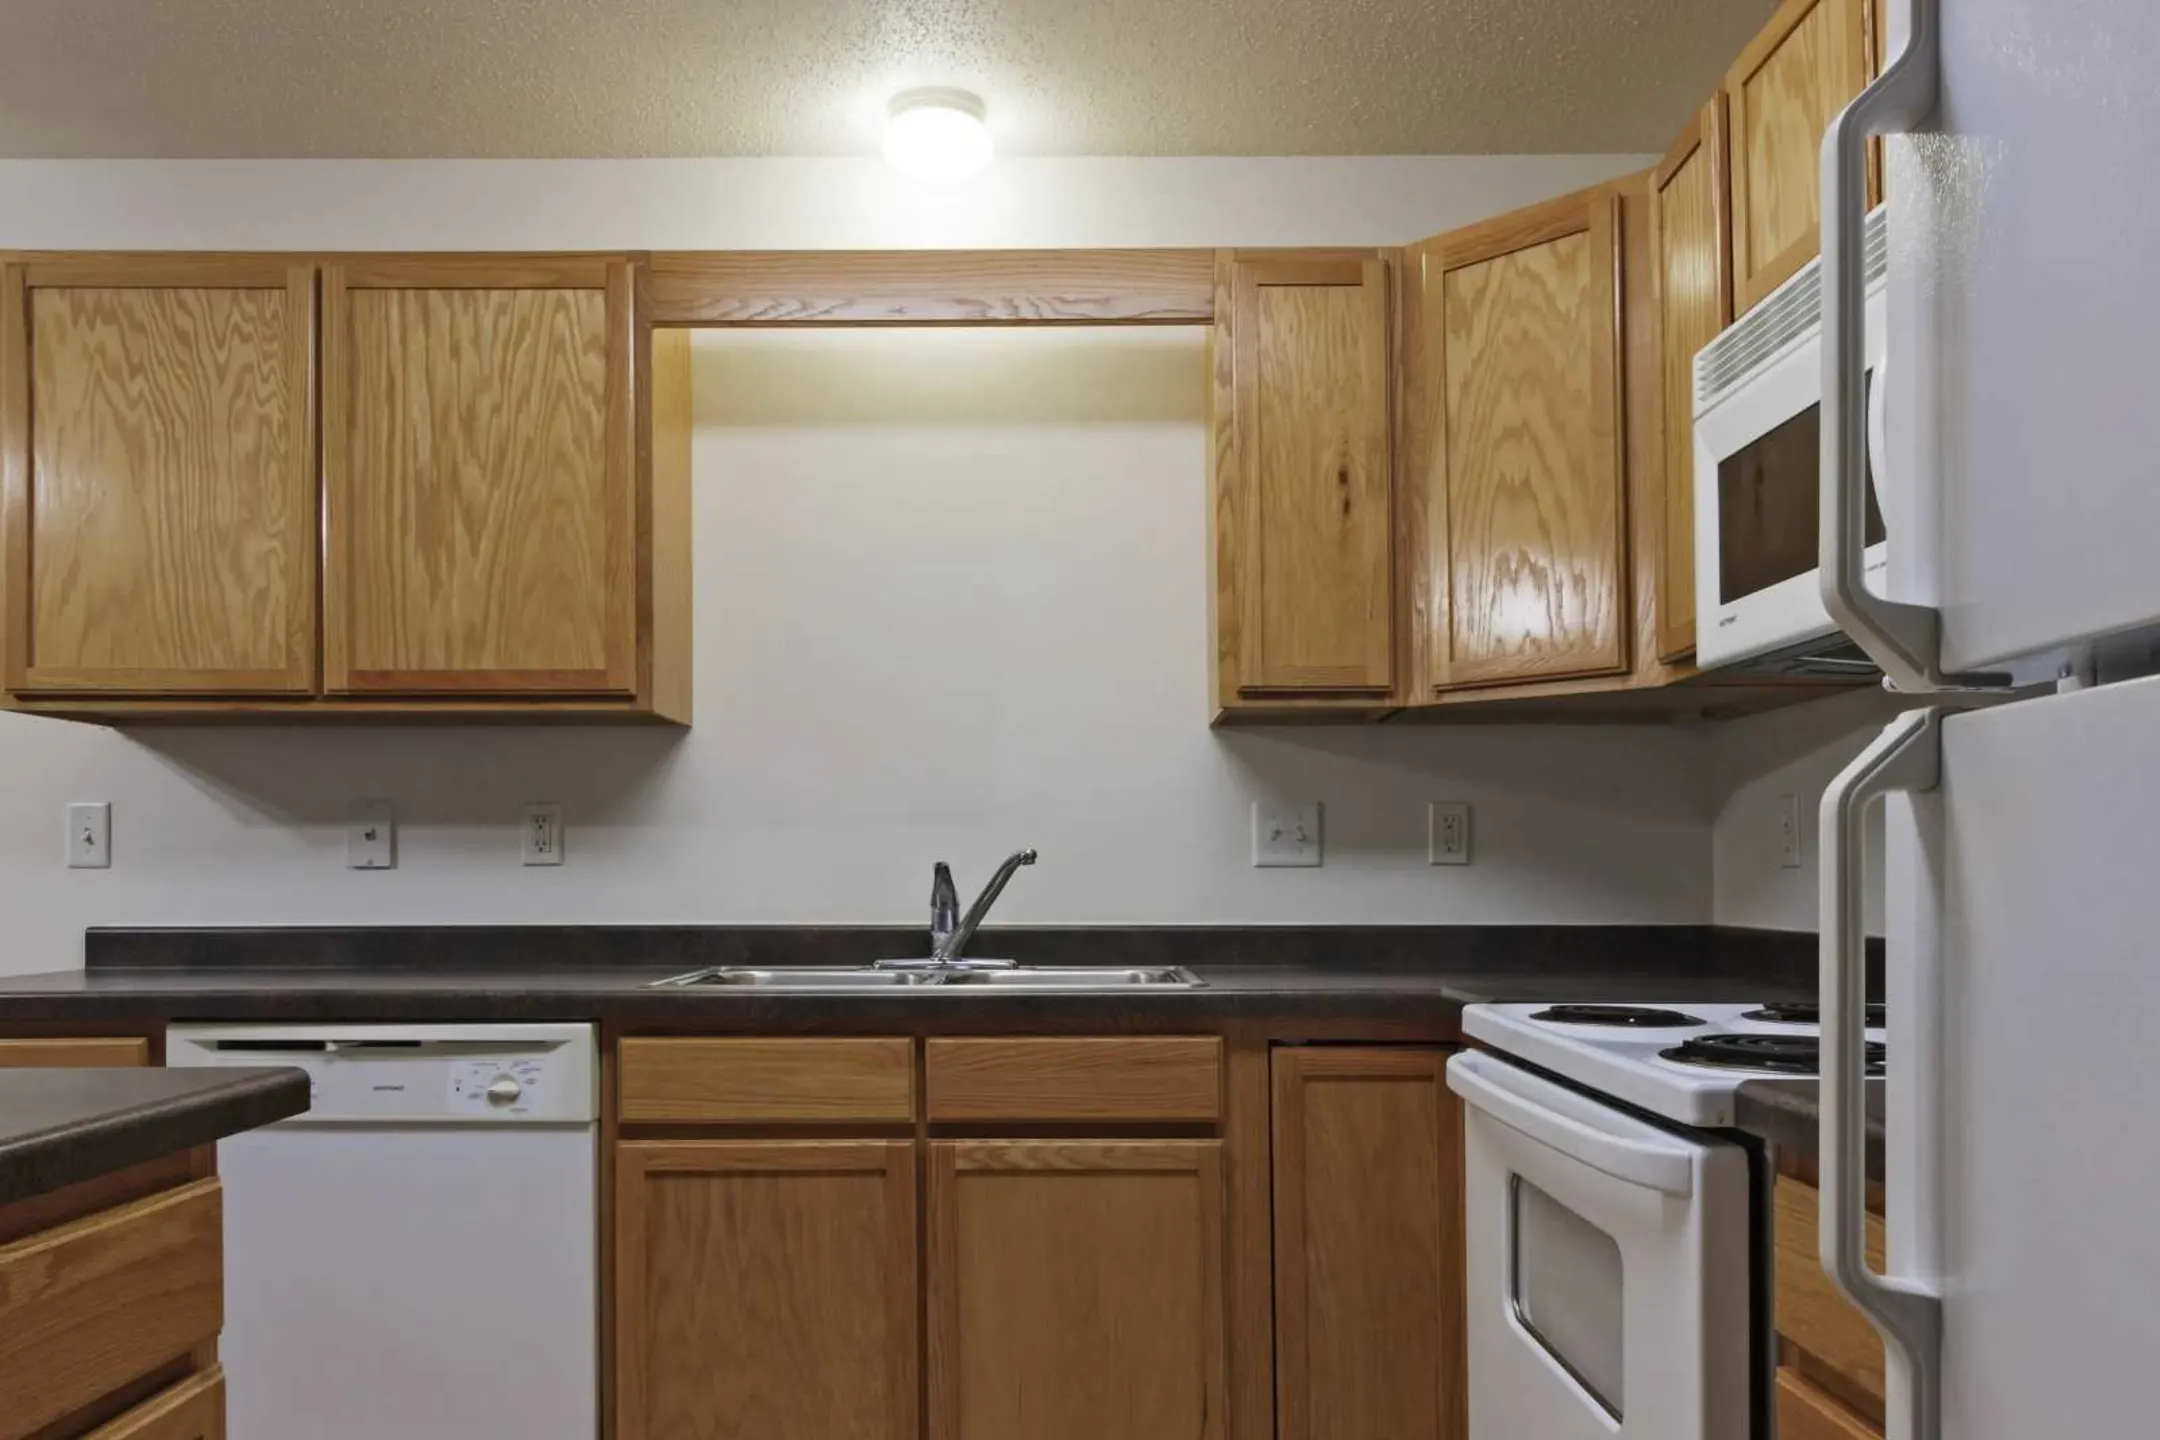 Kitchen - The Woods Apartments - Fargo, ND